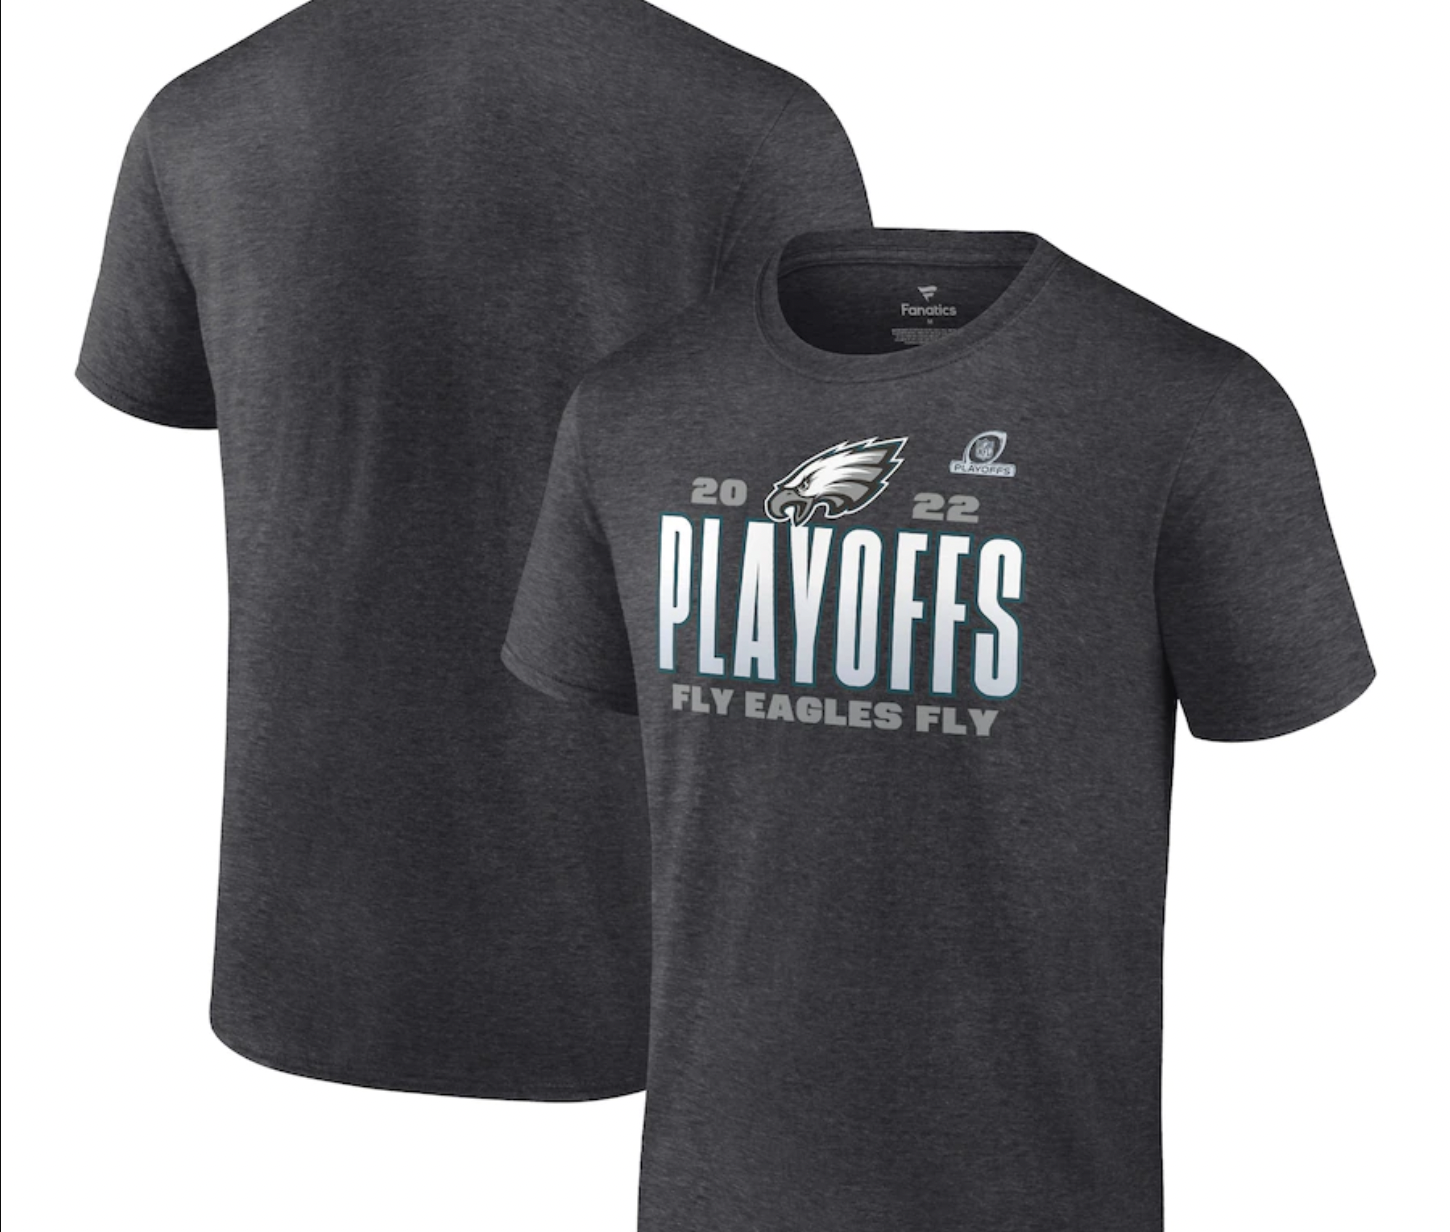 Shop These Philly Makers for All Your Eagles Playoffs Gear